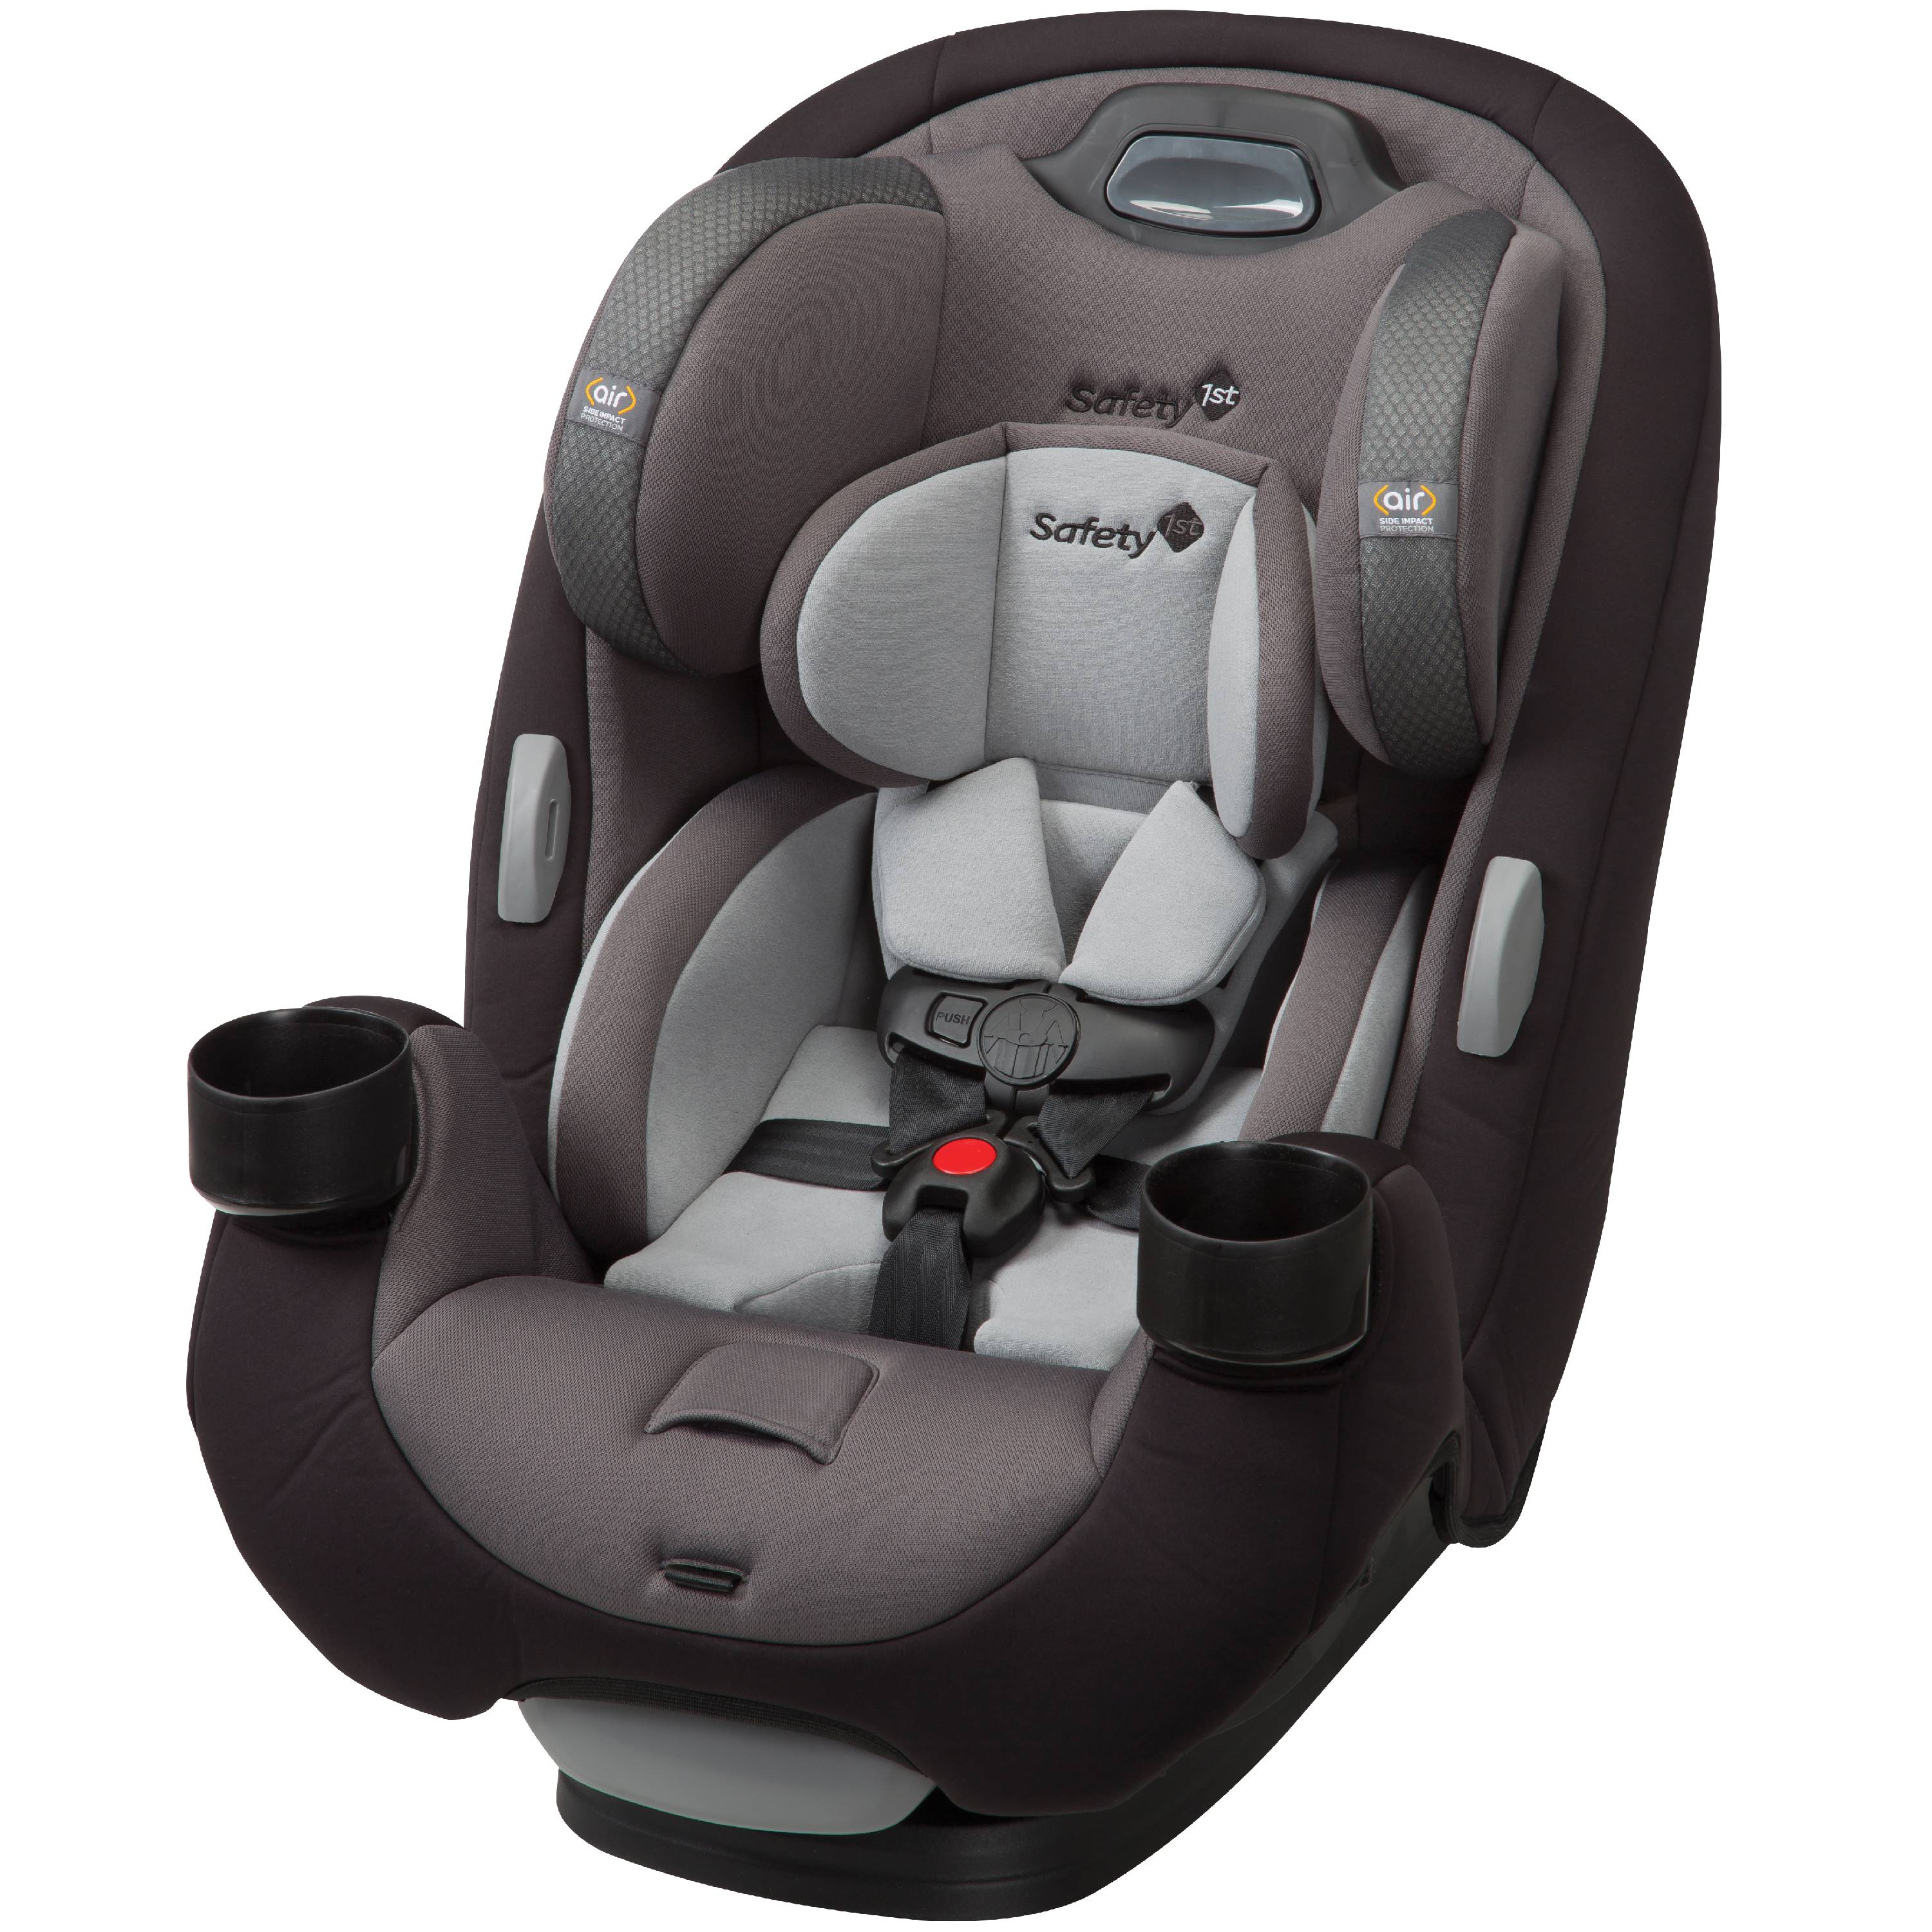 Safety 1st MultiFit EX Air All-in-One Car Seat, Amaro, Toddler - image 1 of 10